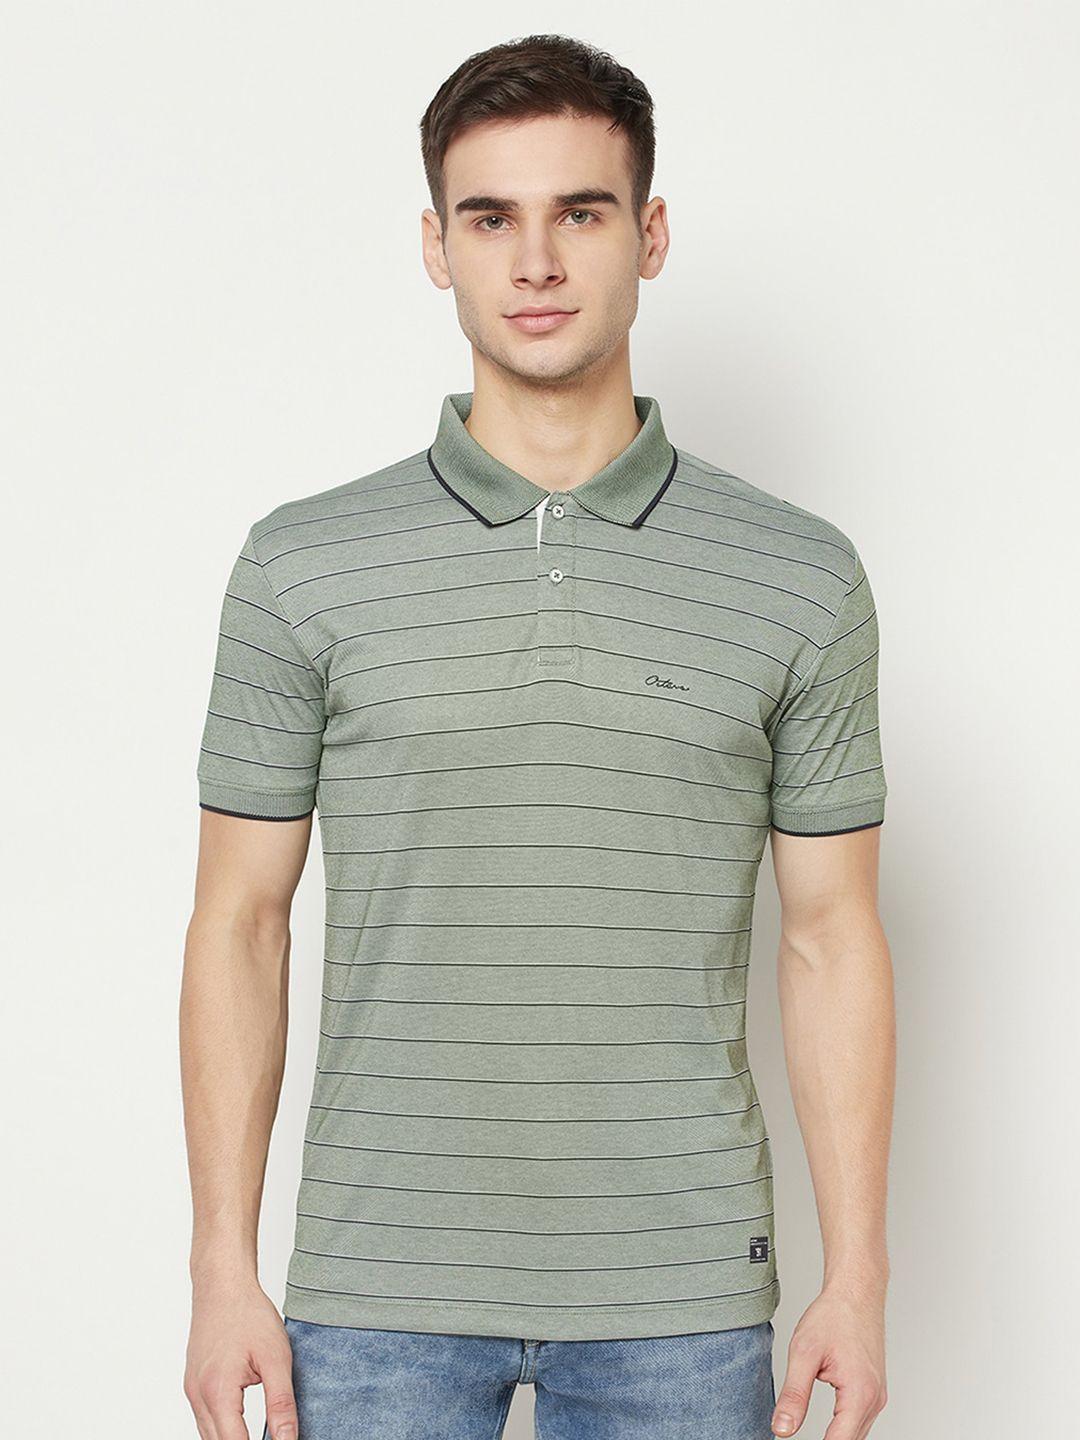 octave men olive green & black striped polo collar t-shirt